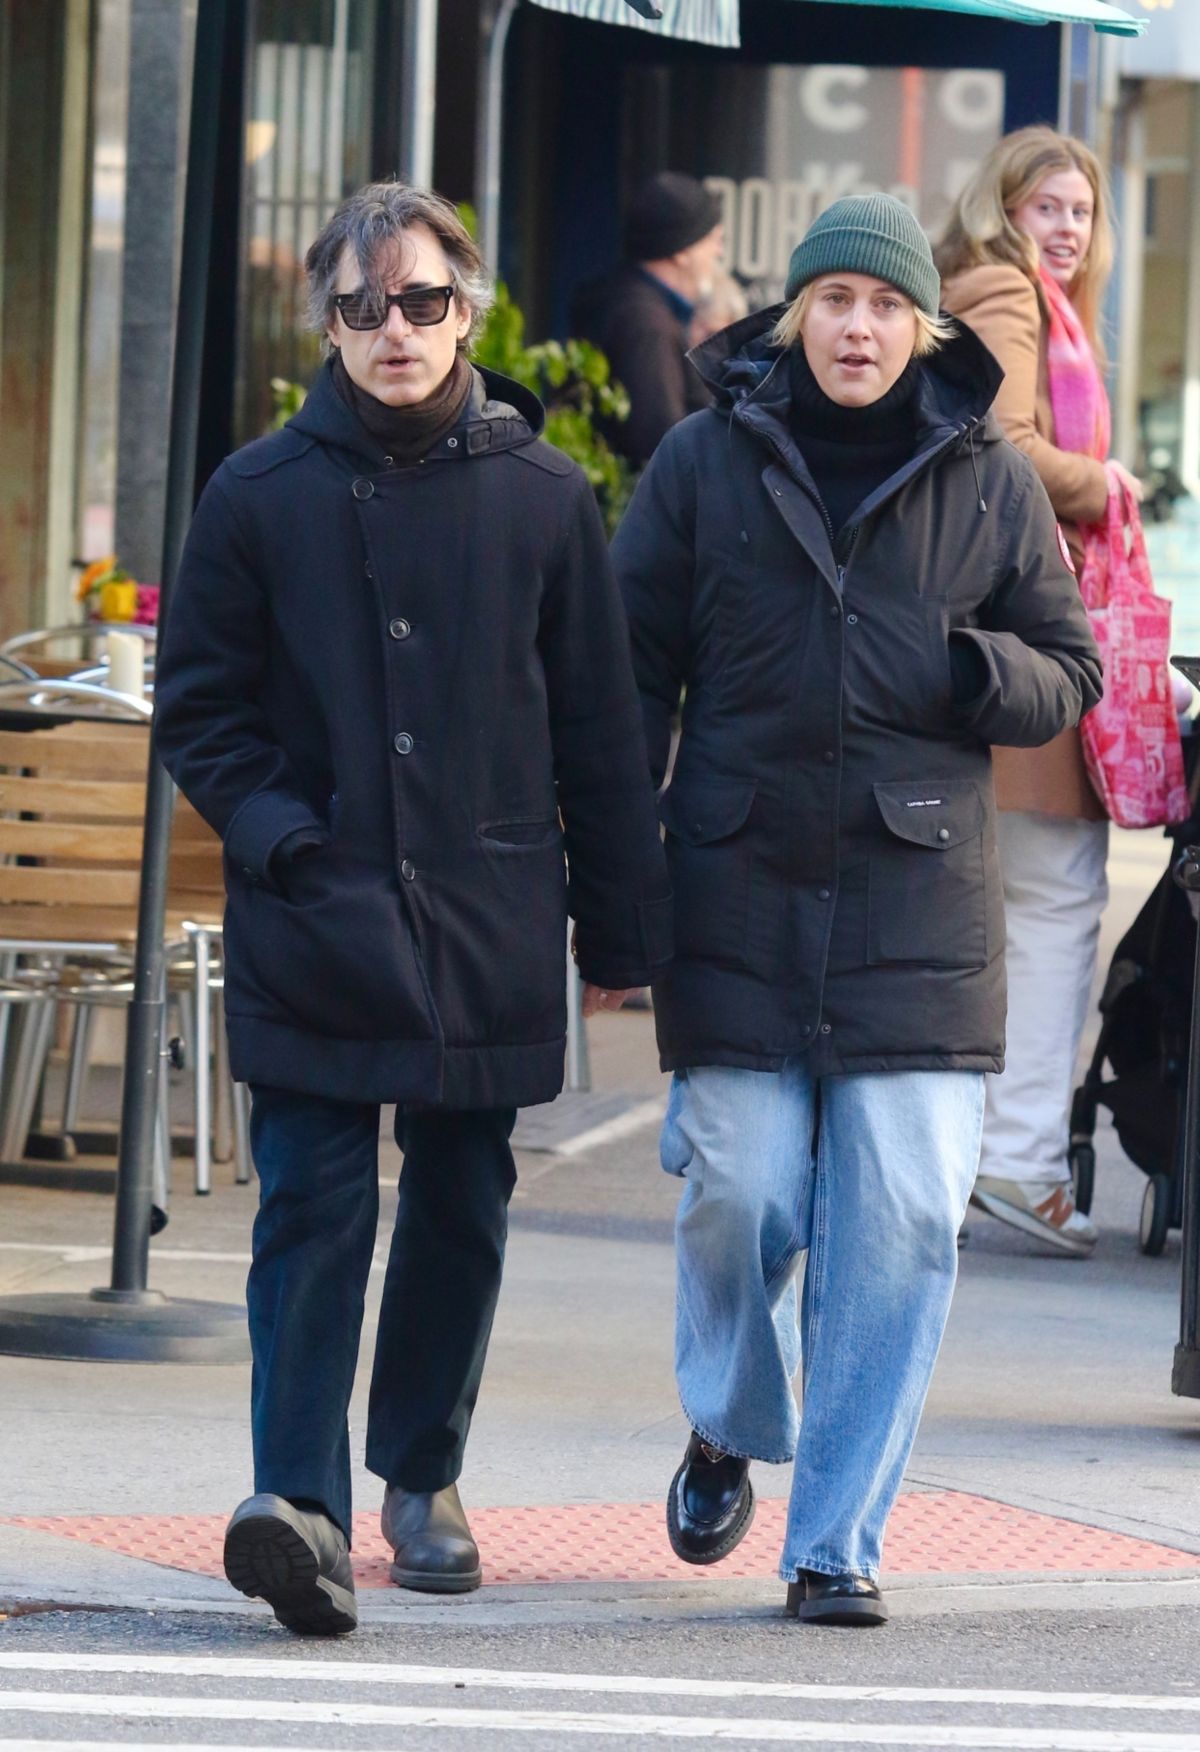 Greta Gerwig and Noah Baumbach Spotted Together in New York